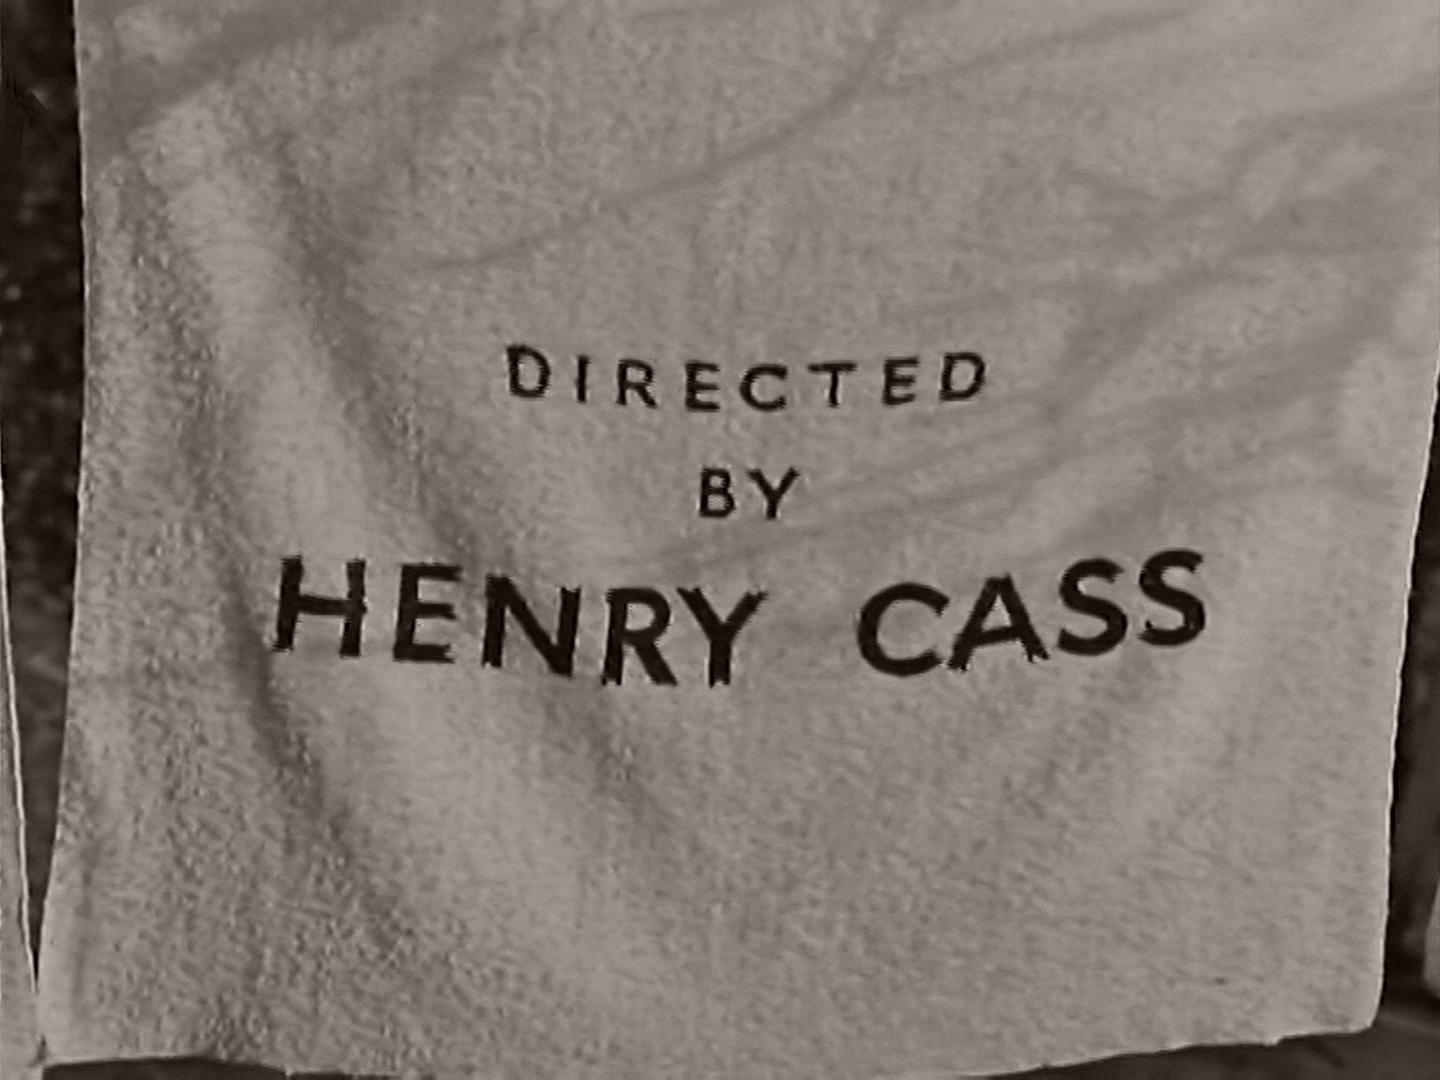 Main title from Young Wives’ Tale (1951) (12). Directed by Henry Cass